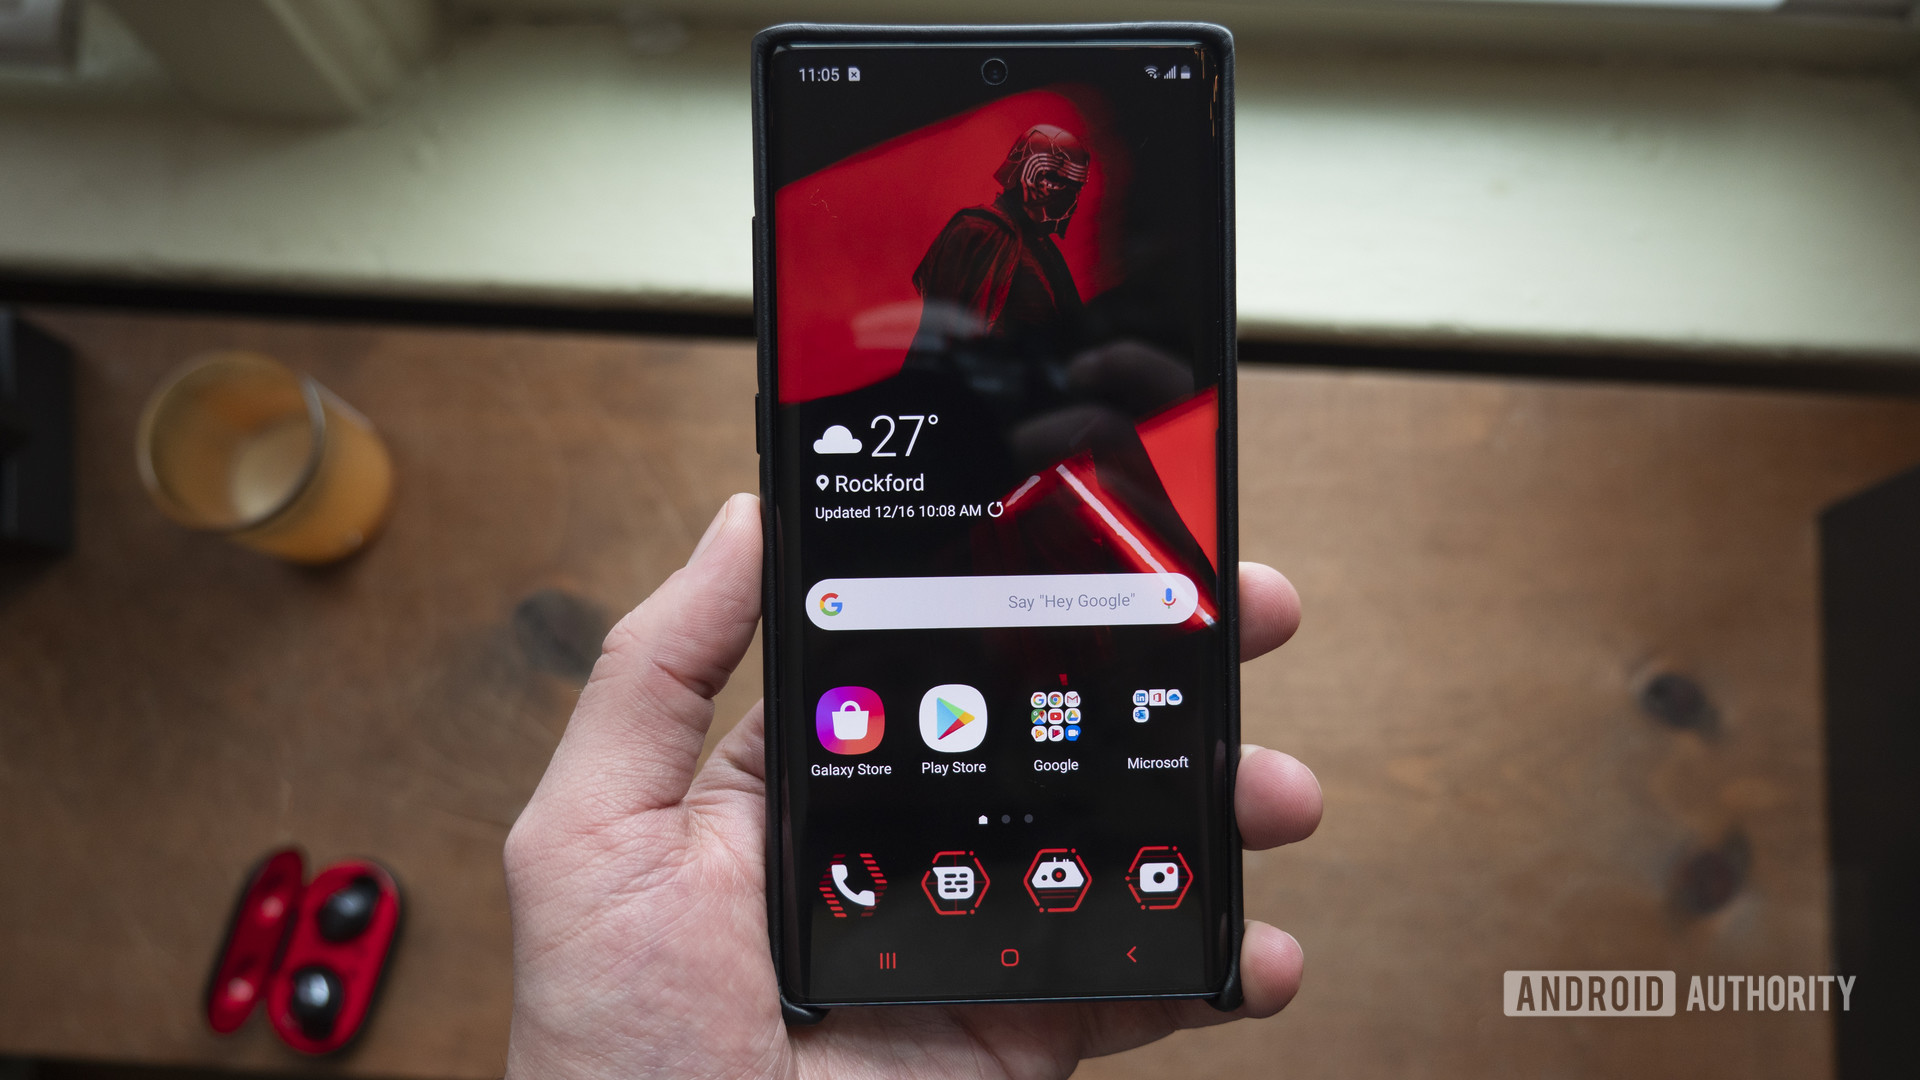 samsung galaxy note 10 plus star wars edition in hand display home screen